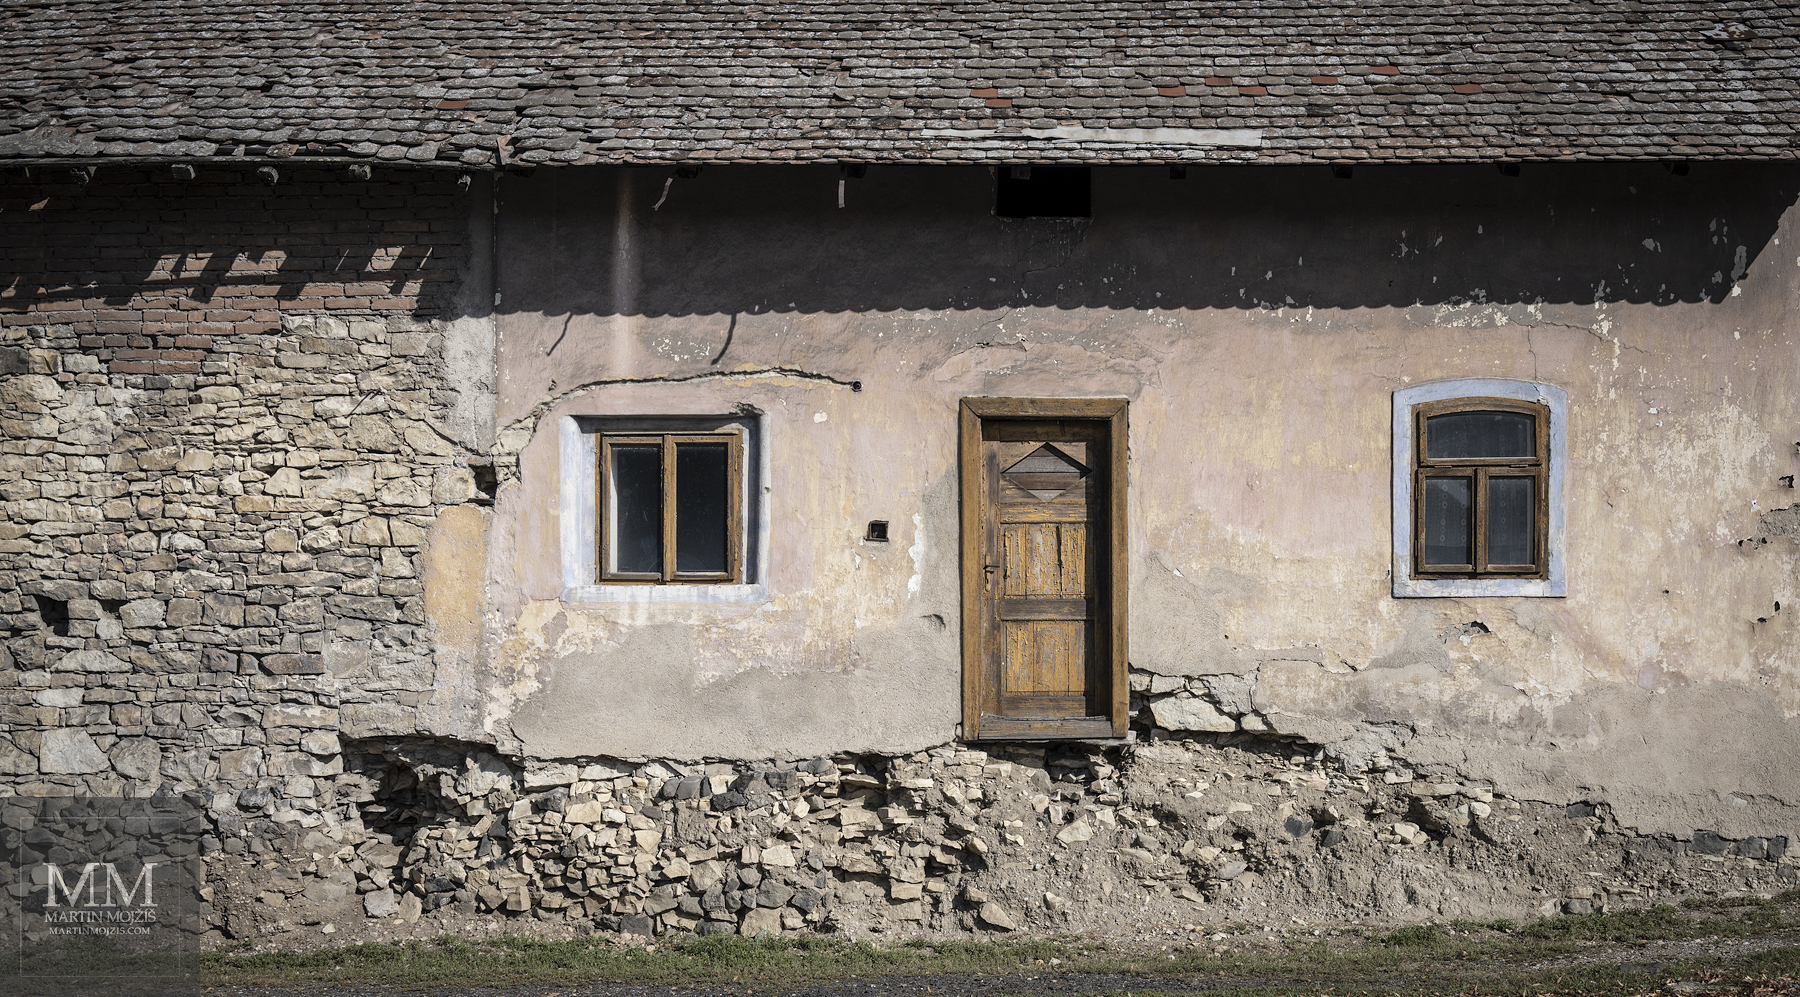 An old house with a door, to which there are no stairs. Fine art photograph IT IS NOT EASY TO ENTER, photographed by Martin Mojzis.